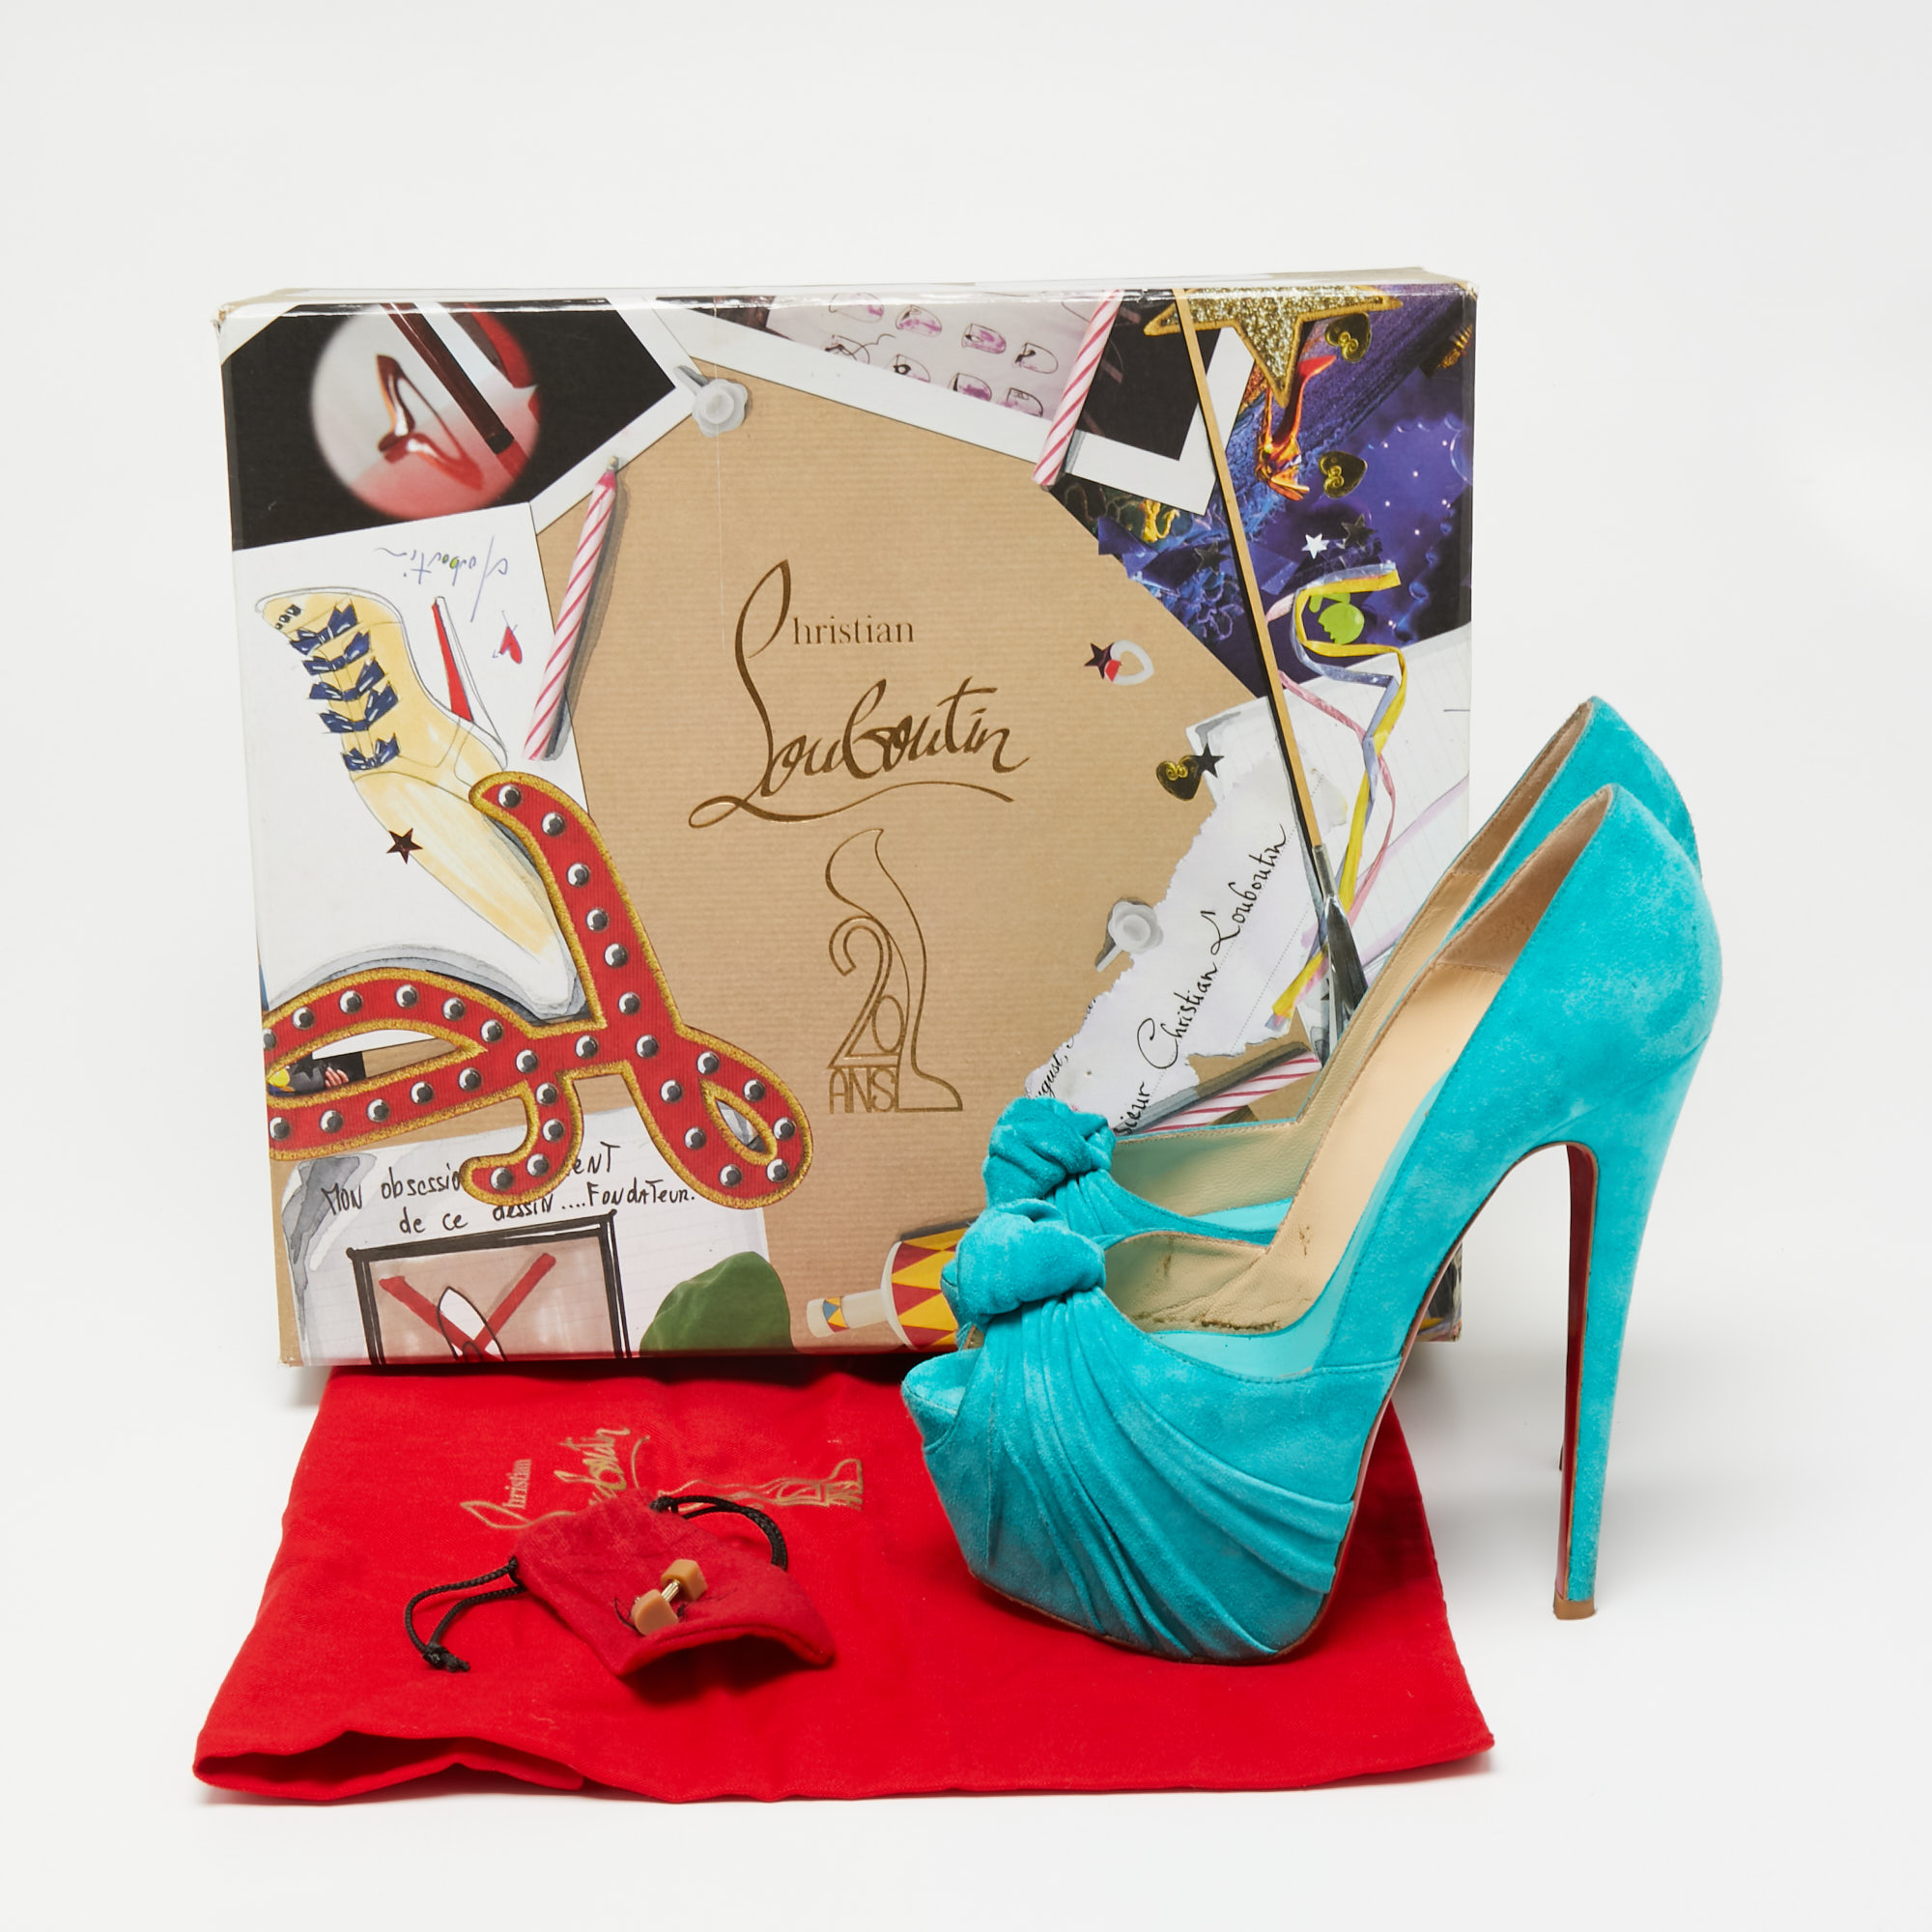 Christian Louboutin Turquoise Suede Lady Gres 20th Anniversary Peep-Toe Platform Pumps Size 37